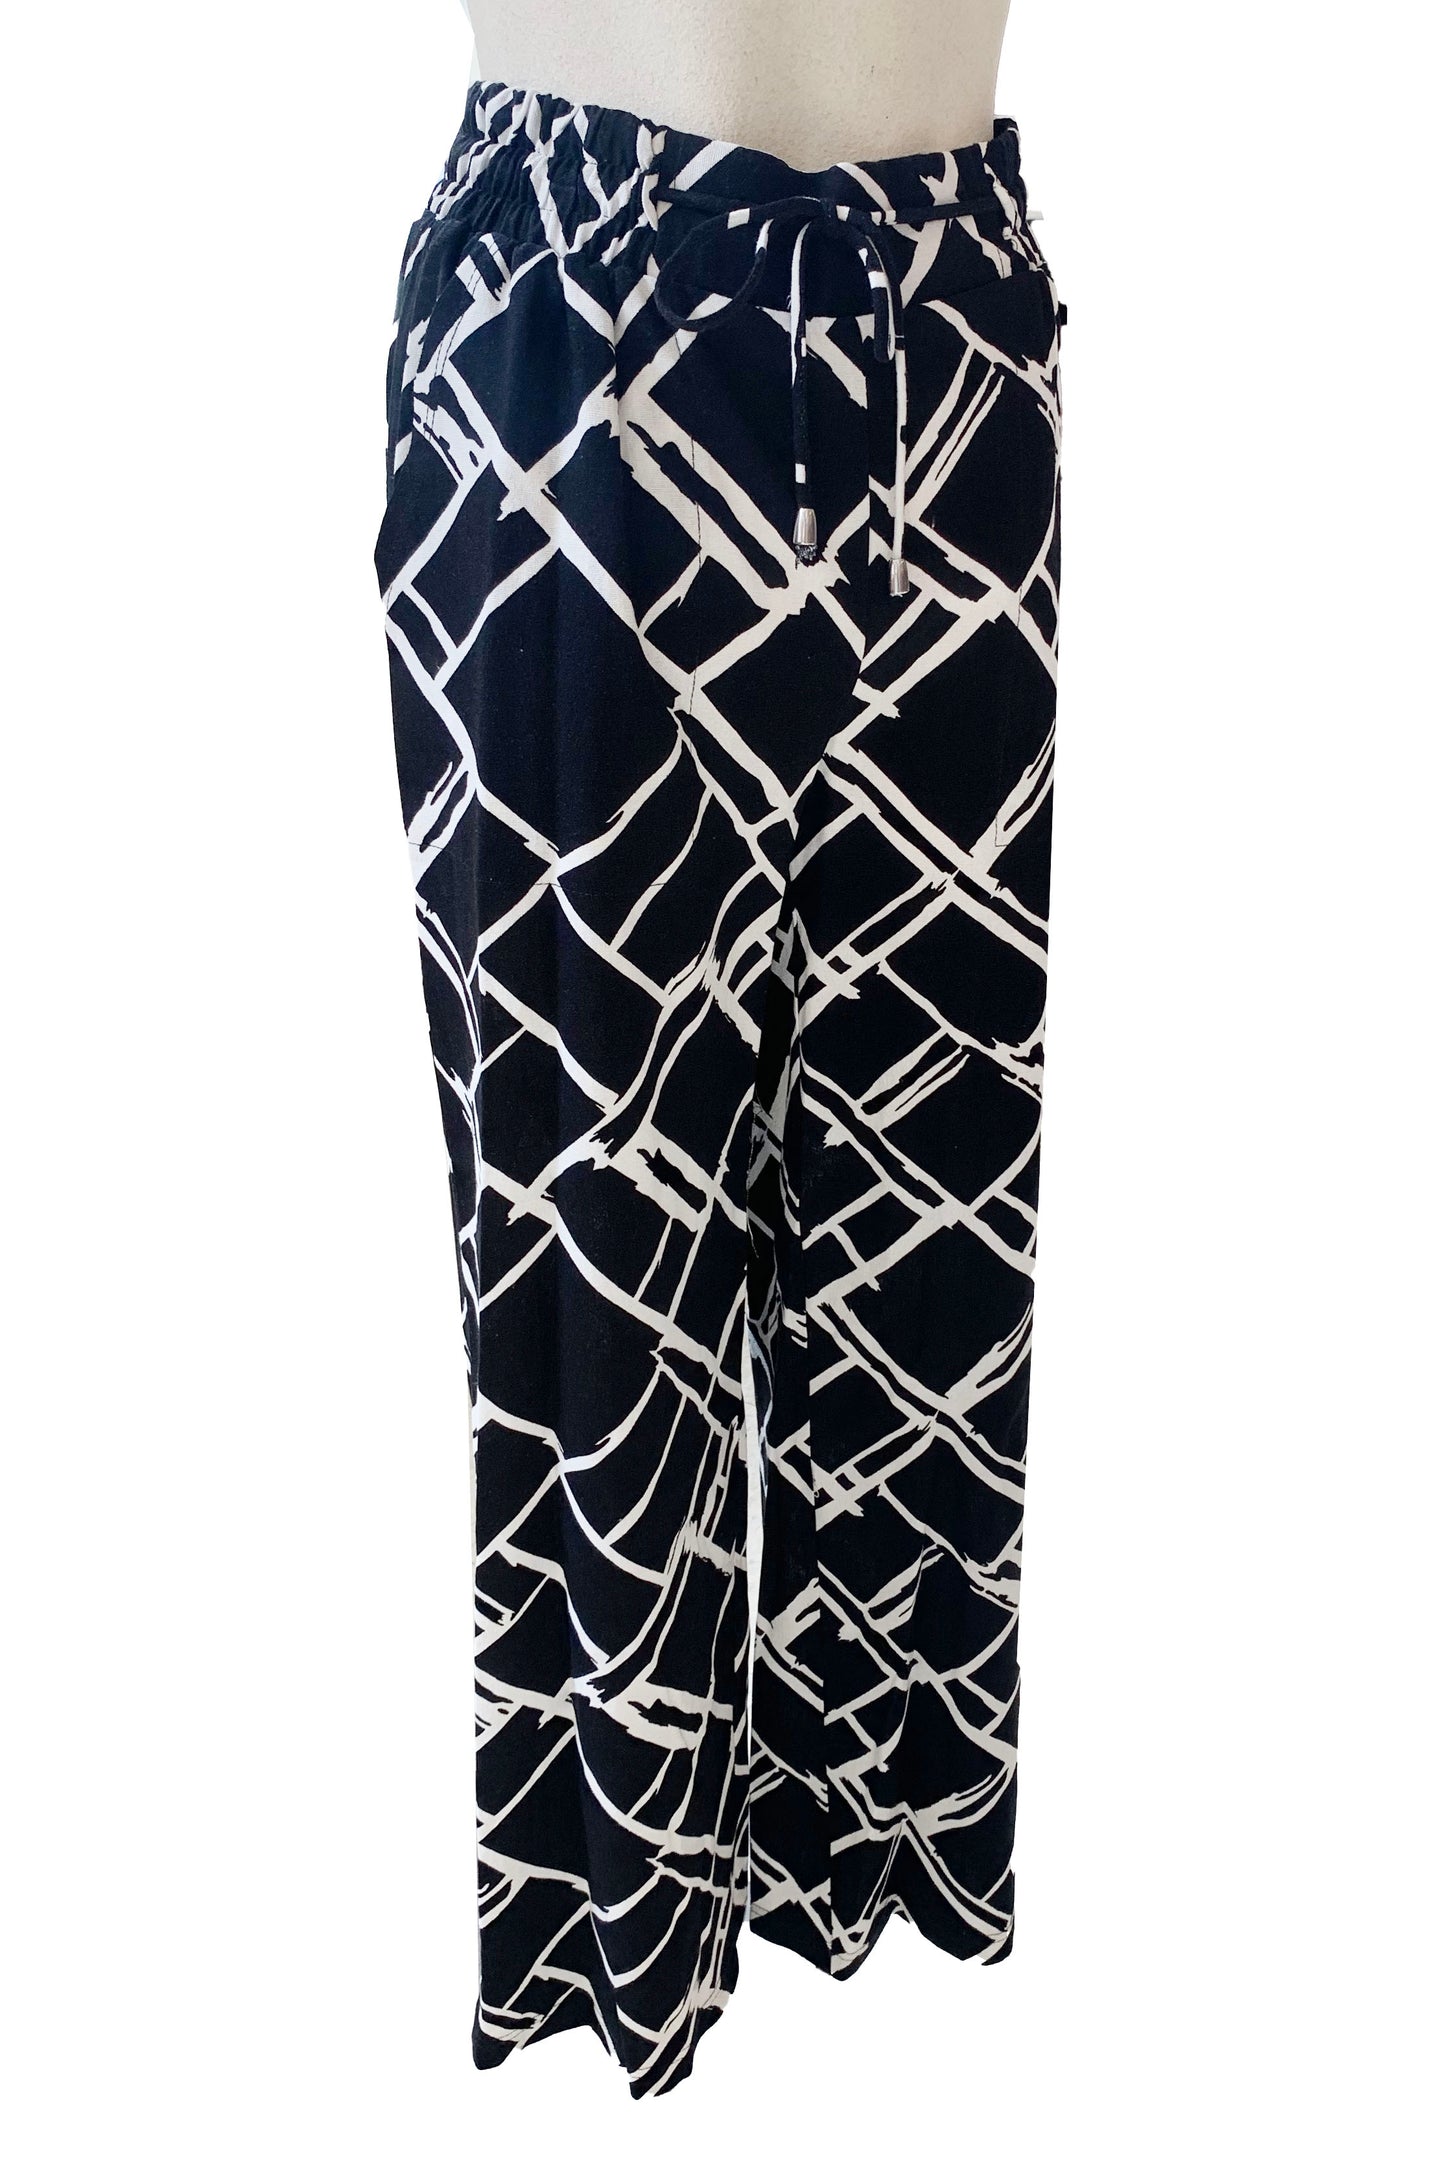 The Pure Essence Charmaine Pant in Black/White is show on a mannequin in front of a white background 